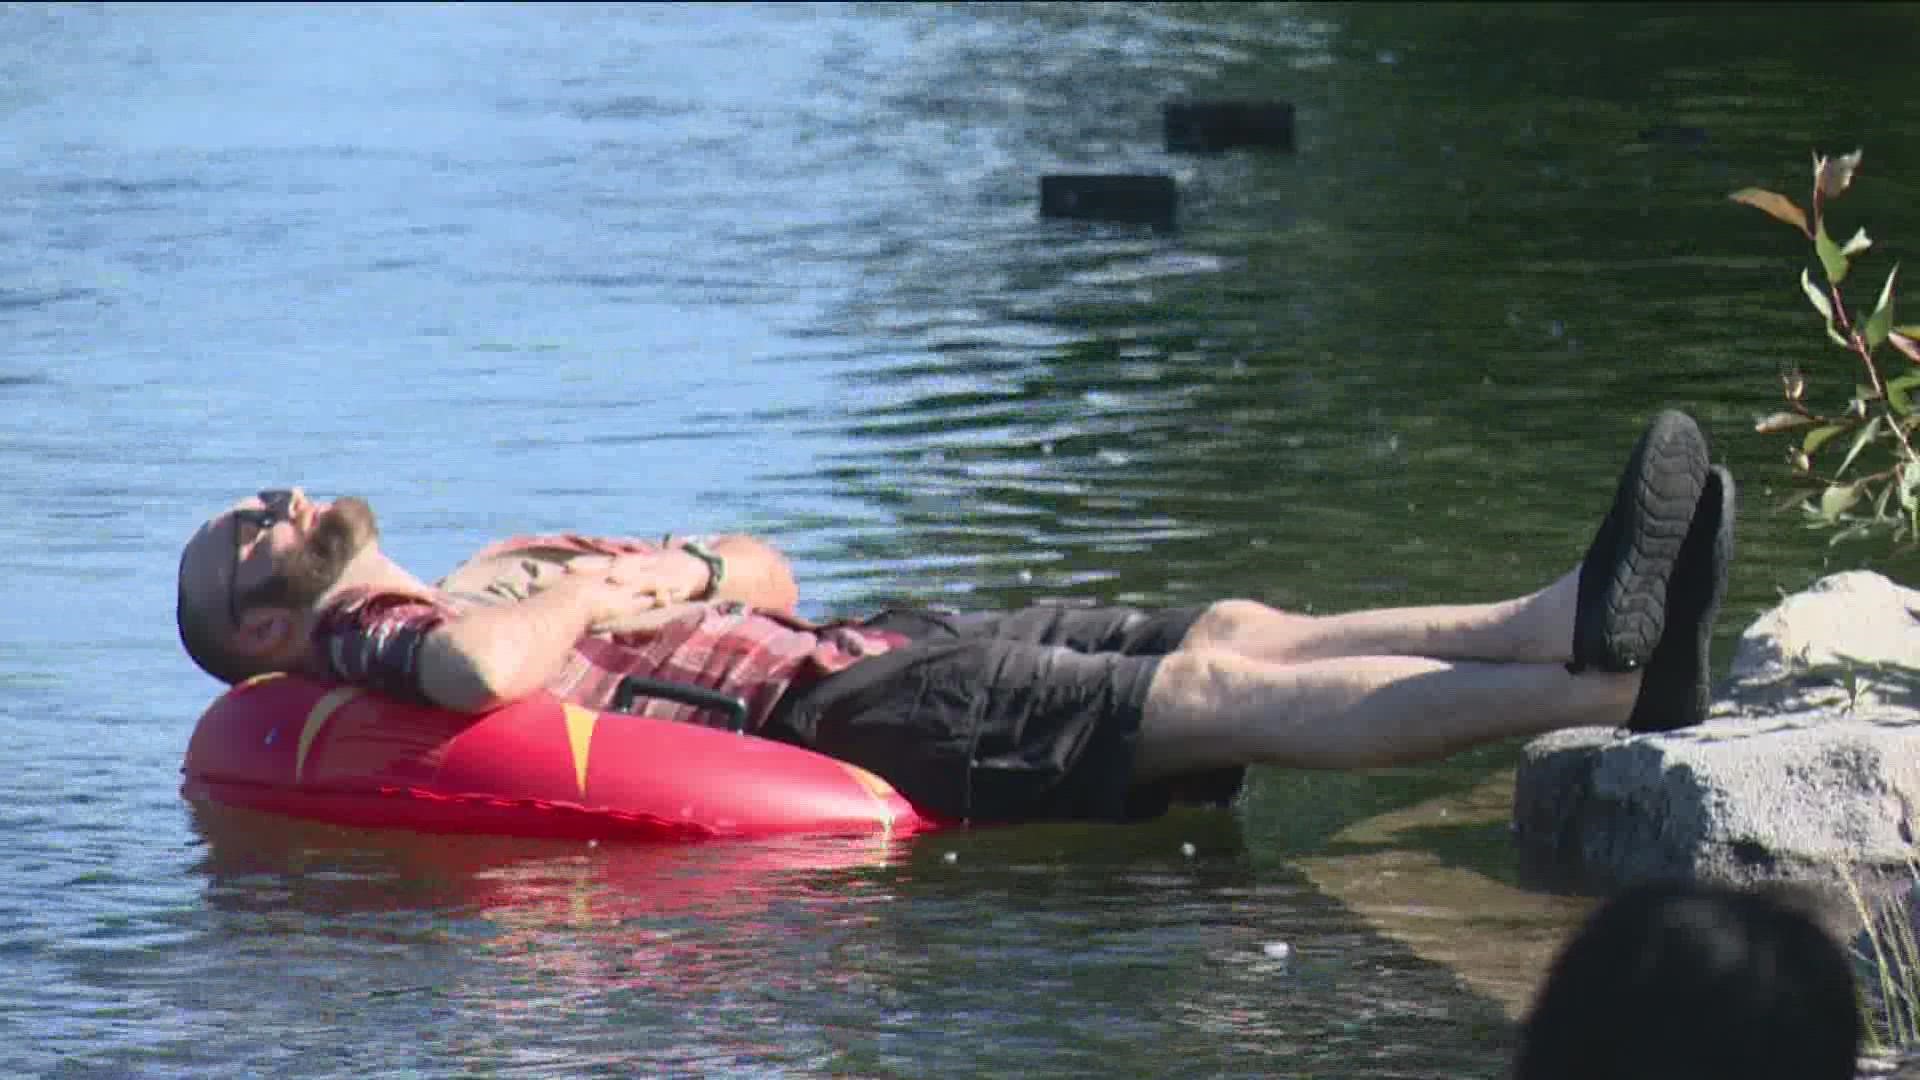 Our photojournalist John Mark Krum was at Quinns pond Tuesday and shows us how people are feeling about summertime.